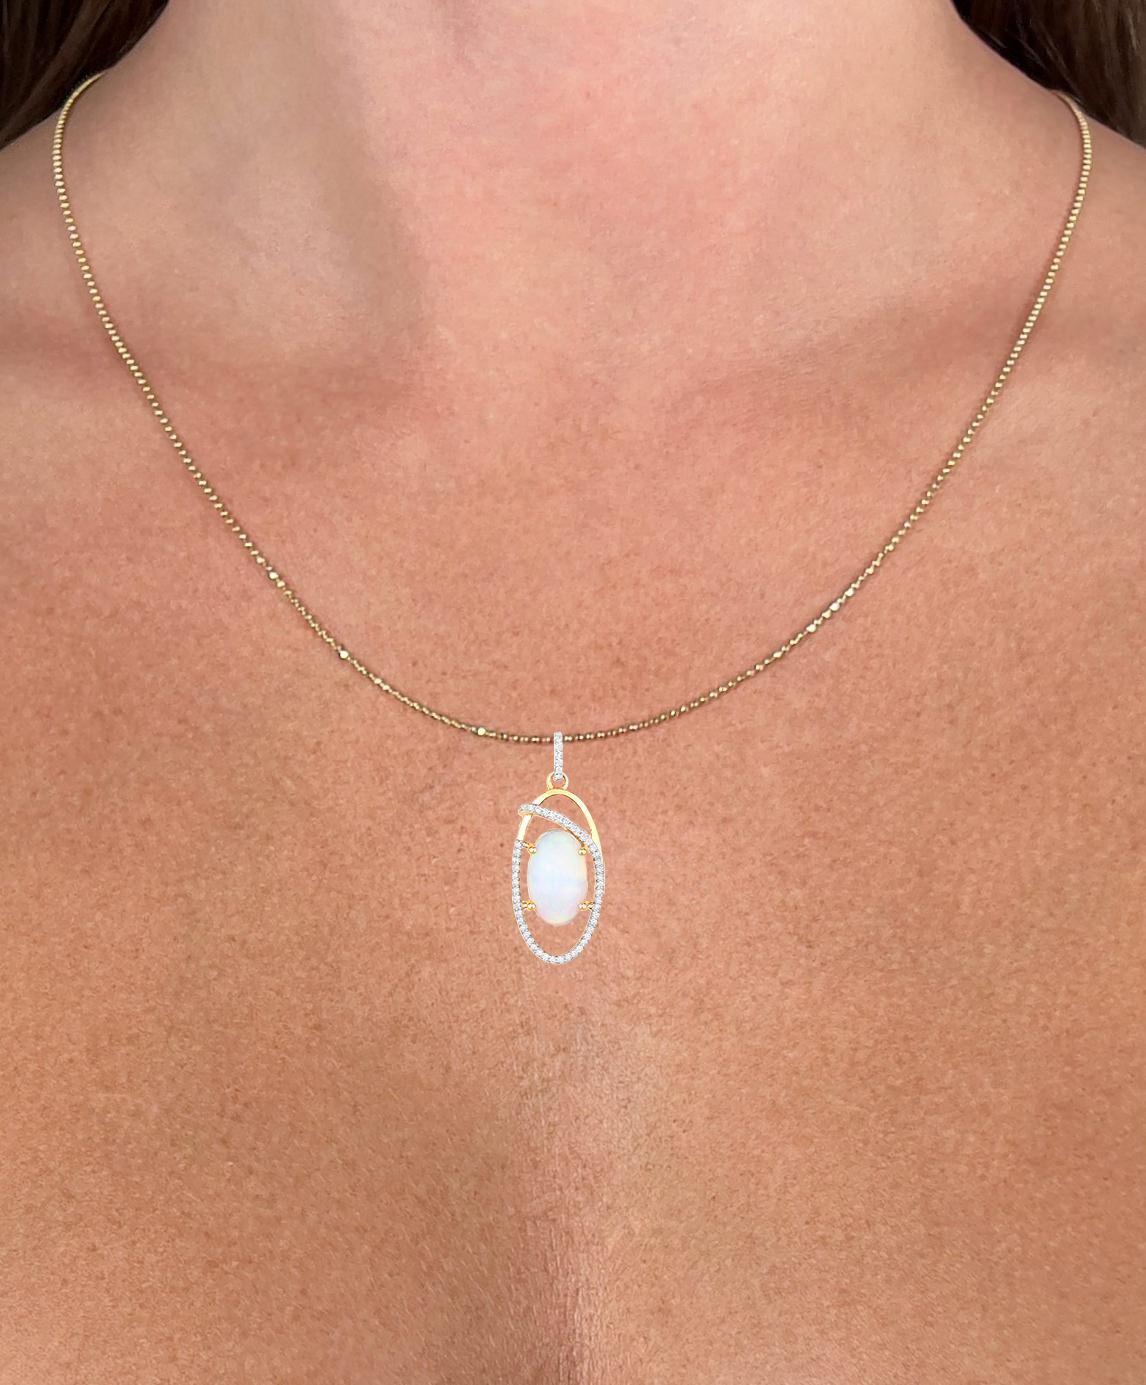 Contemporary Natural Ethiopian Opal Pendant Necklace Diamond Setting 3.63 Carats 14K Gold For Sale